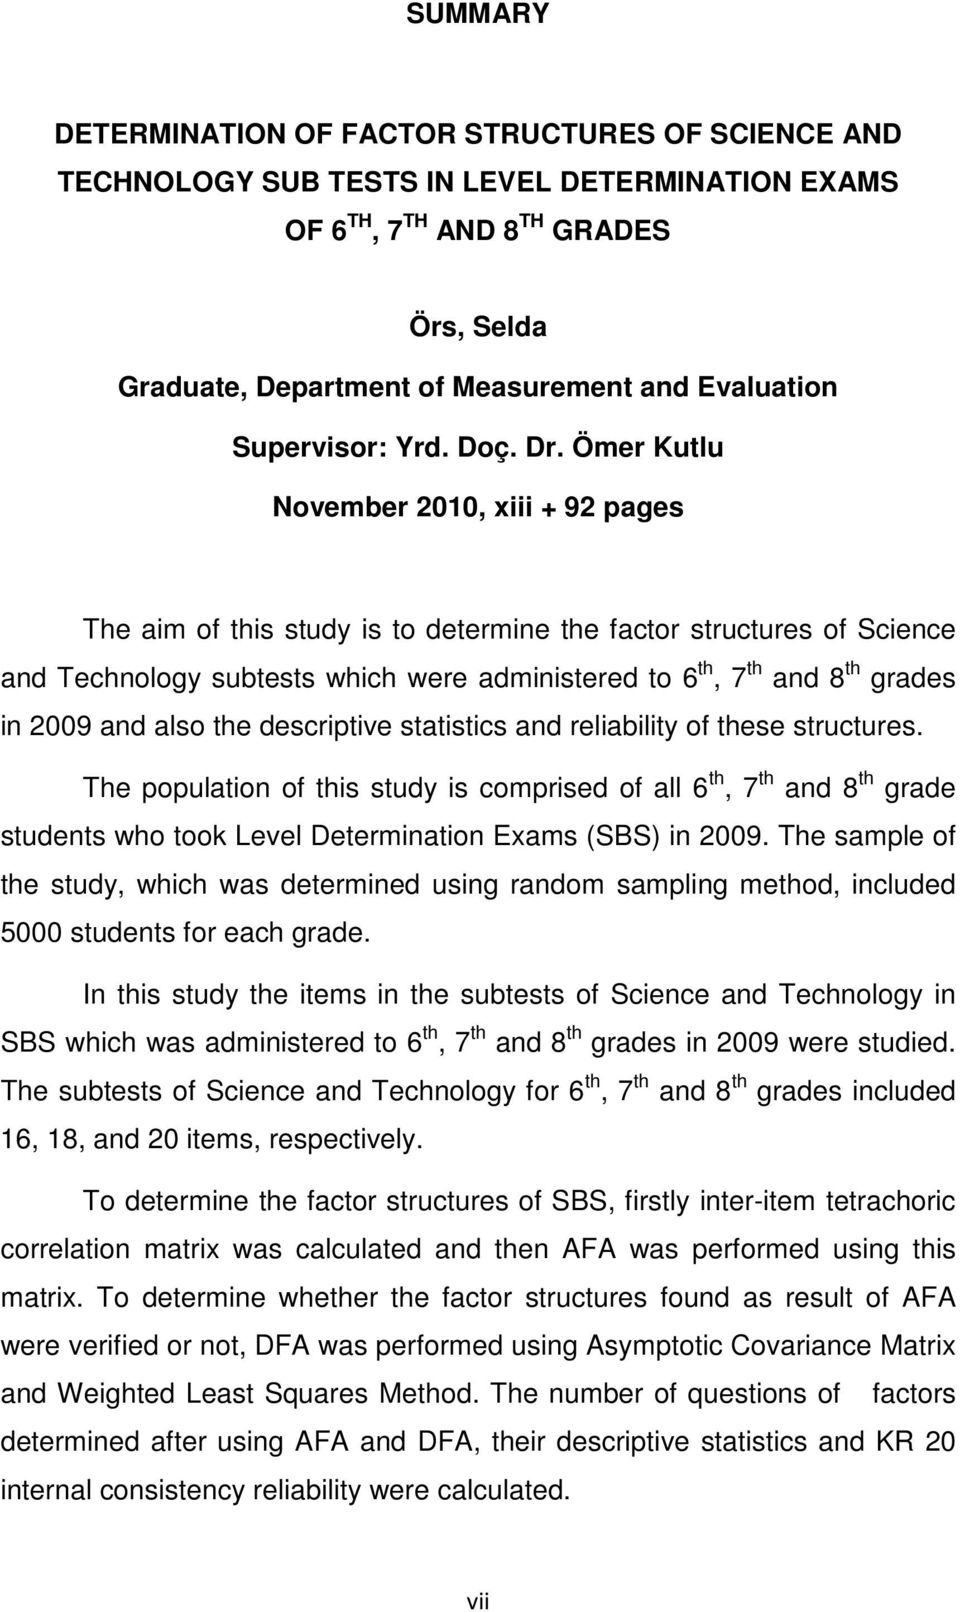 Ömer Kutlu November 2010, xiii + 92 pages The aim of this study is to determine the factor structures of Science and Technology subtests which were administered to 6 th, 7 th and 8 th grades in 2009